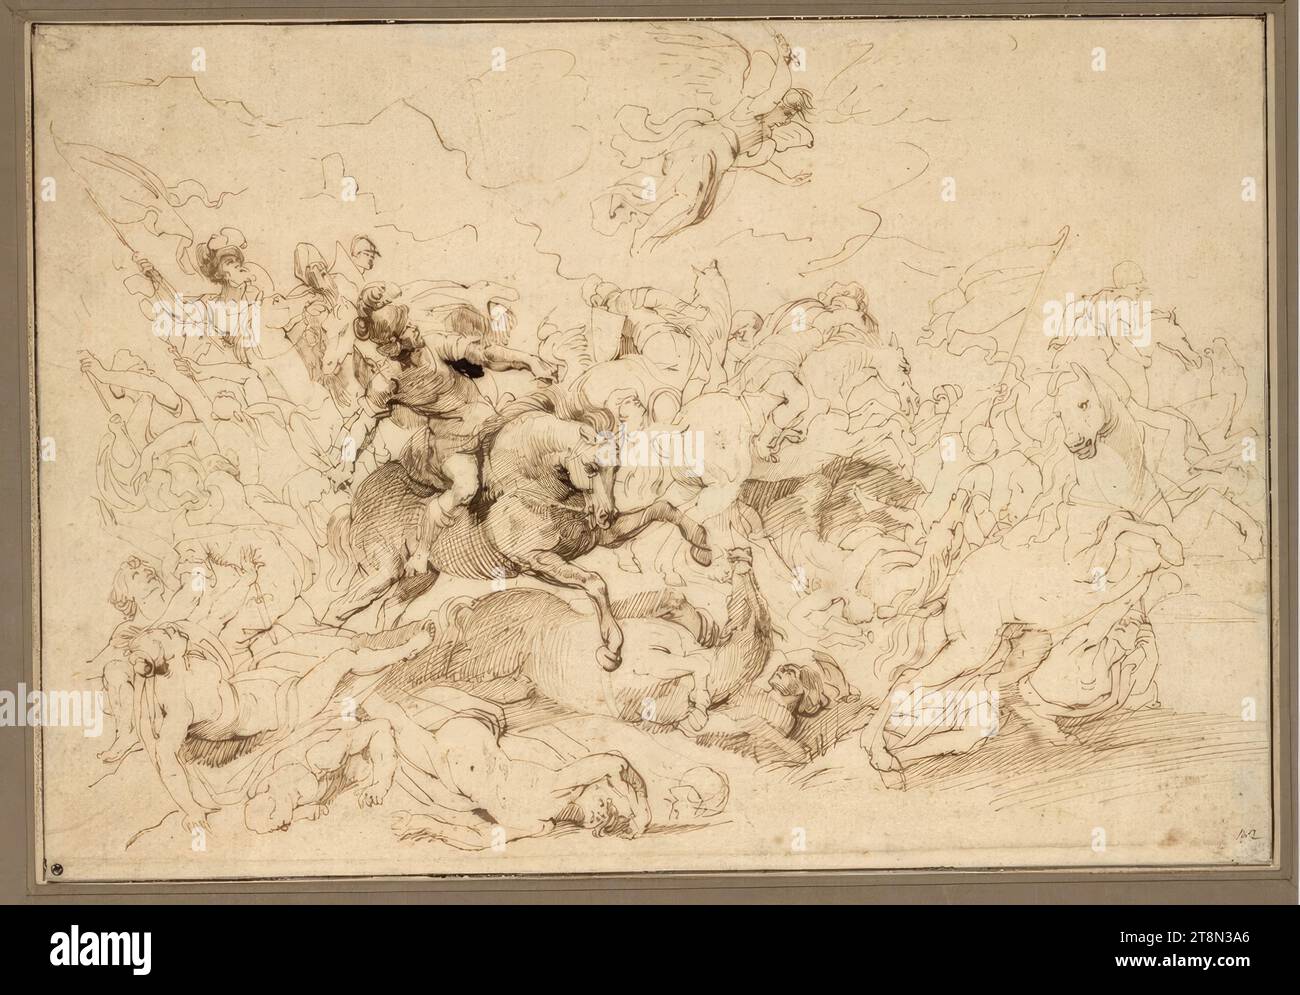 The defeat of Sennacherib, Peter Paul Rubens (Siegen 1577 - 1640 Antwerp), around or shortly after 1615/16, drawing, pen and ink in brown, 21.8 x 31.4 cm, l. and Mariette (L. 1852); right and Duke Albert of Saxe-Teschen, r.r. '42 Stock Photo